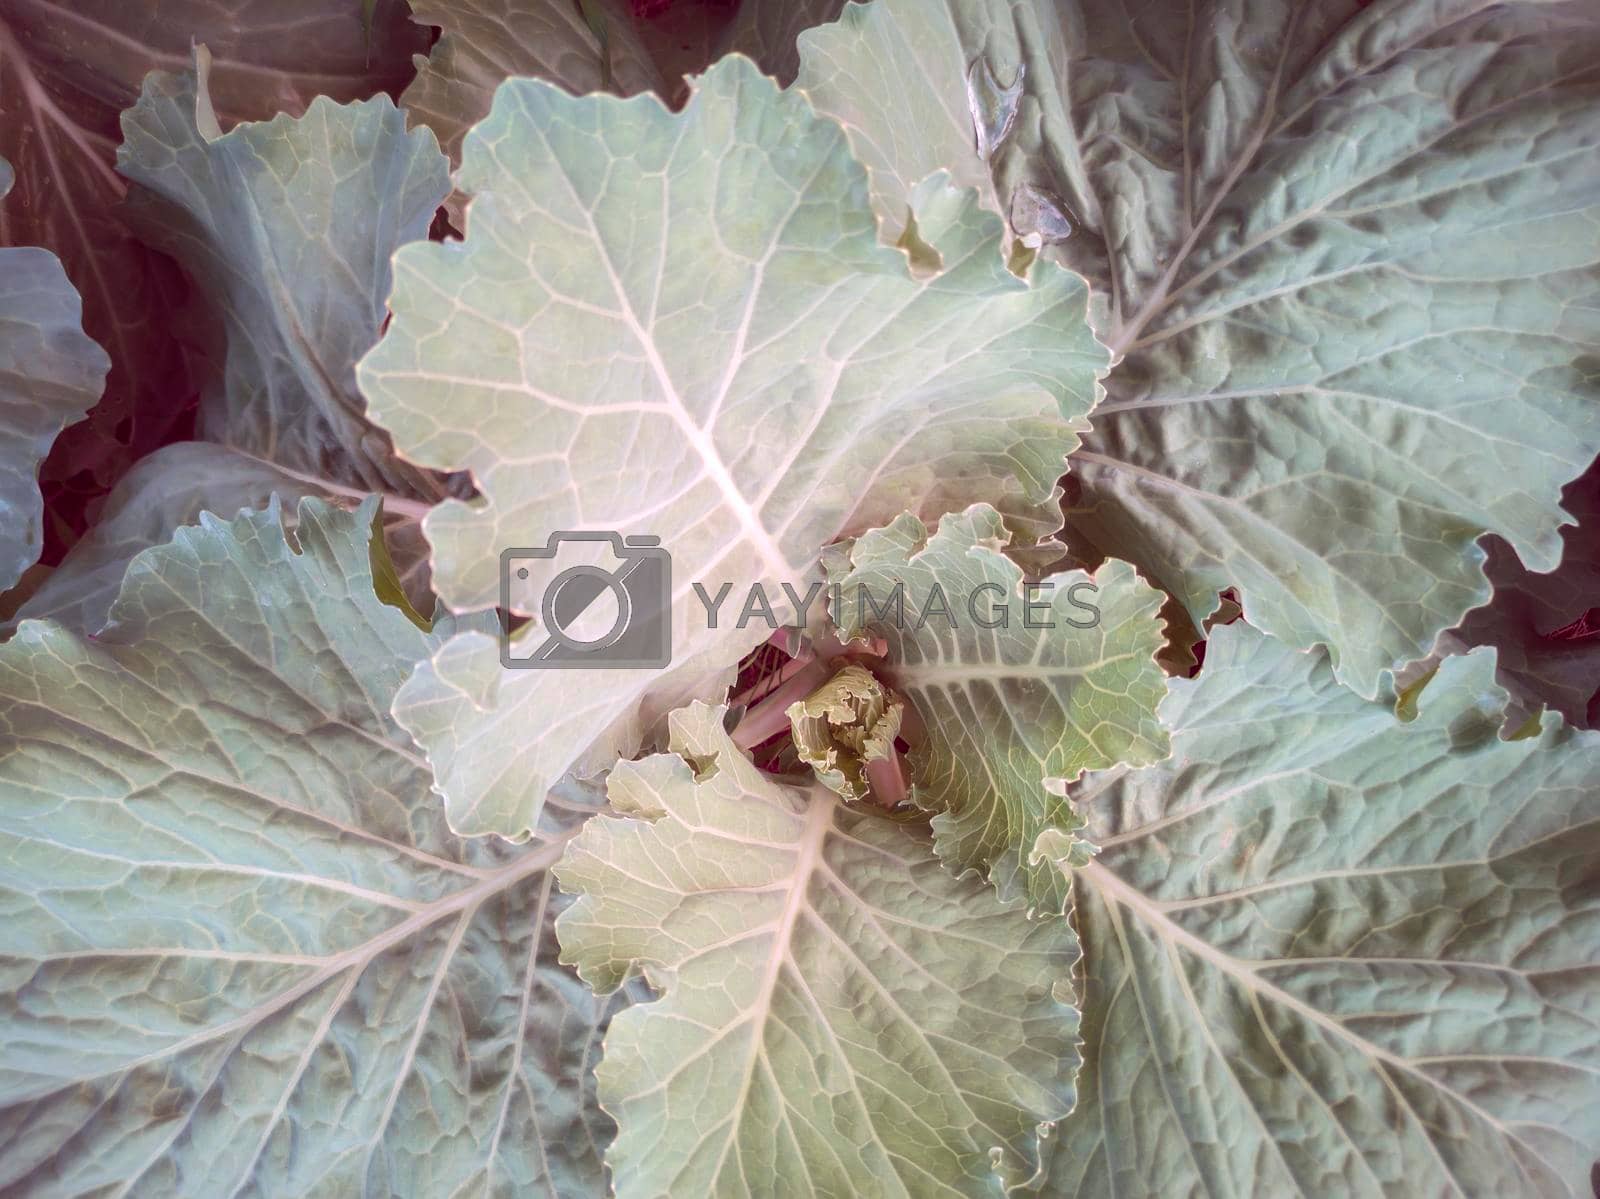 Royalty free image of A head of cabbage grows in the garden by georgina198